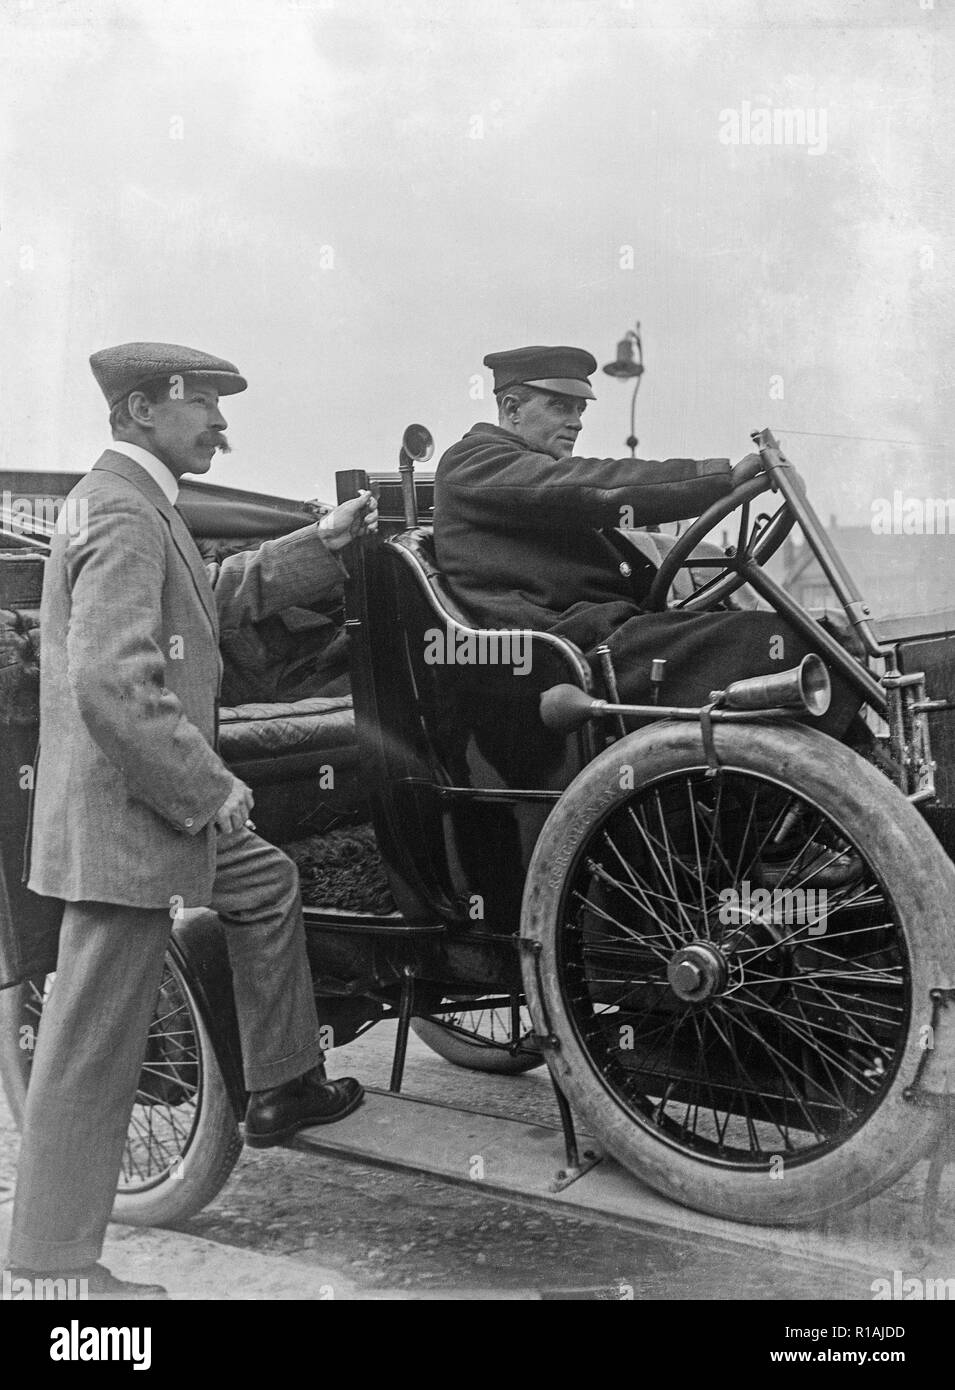 A black and white photograph taken during the early 20th century showing two men and a vintage motor car. One man behind the steering wheel, and one man standing with one foot on the running board of the car. Stock Photo